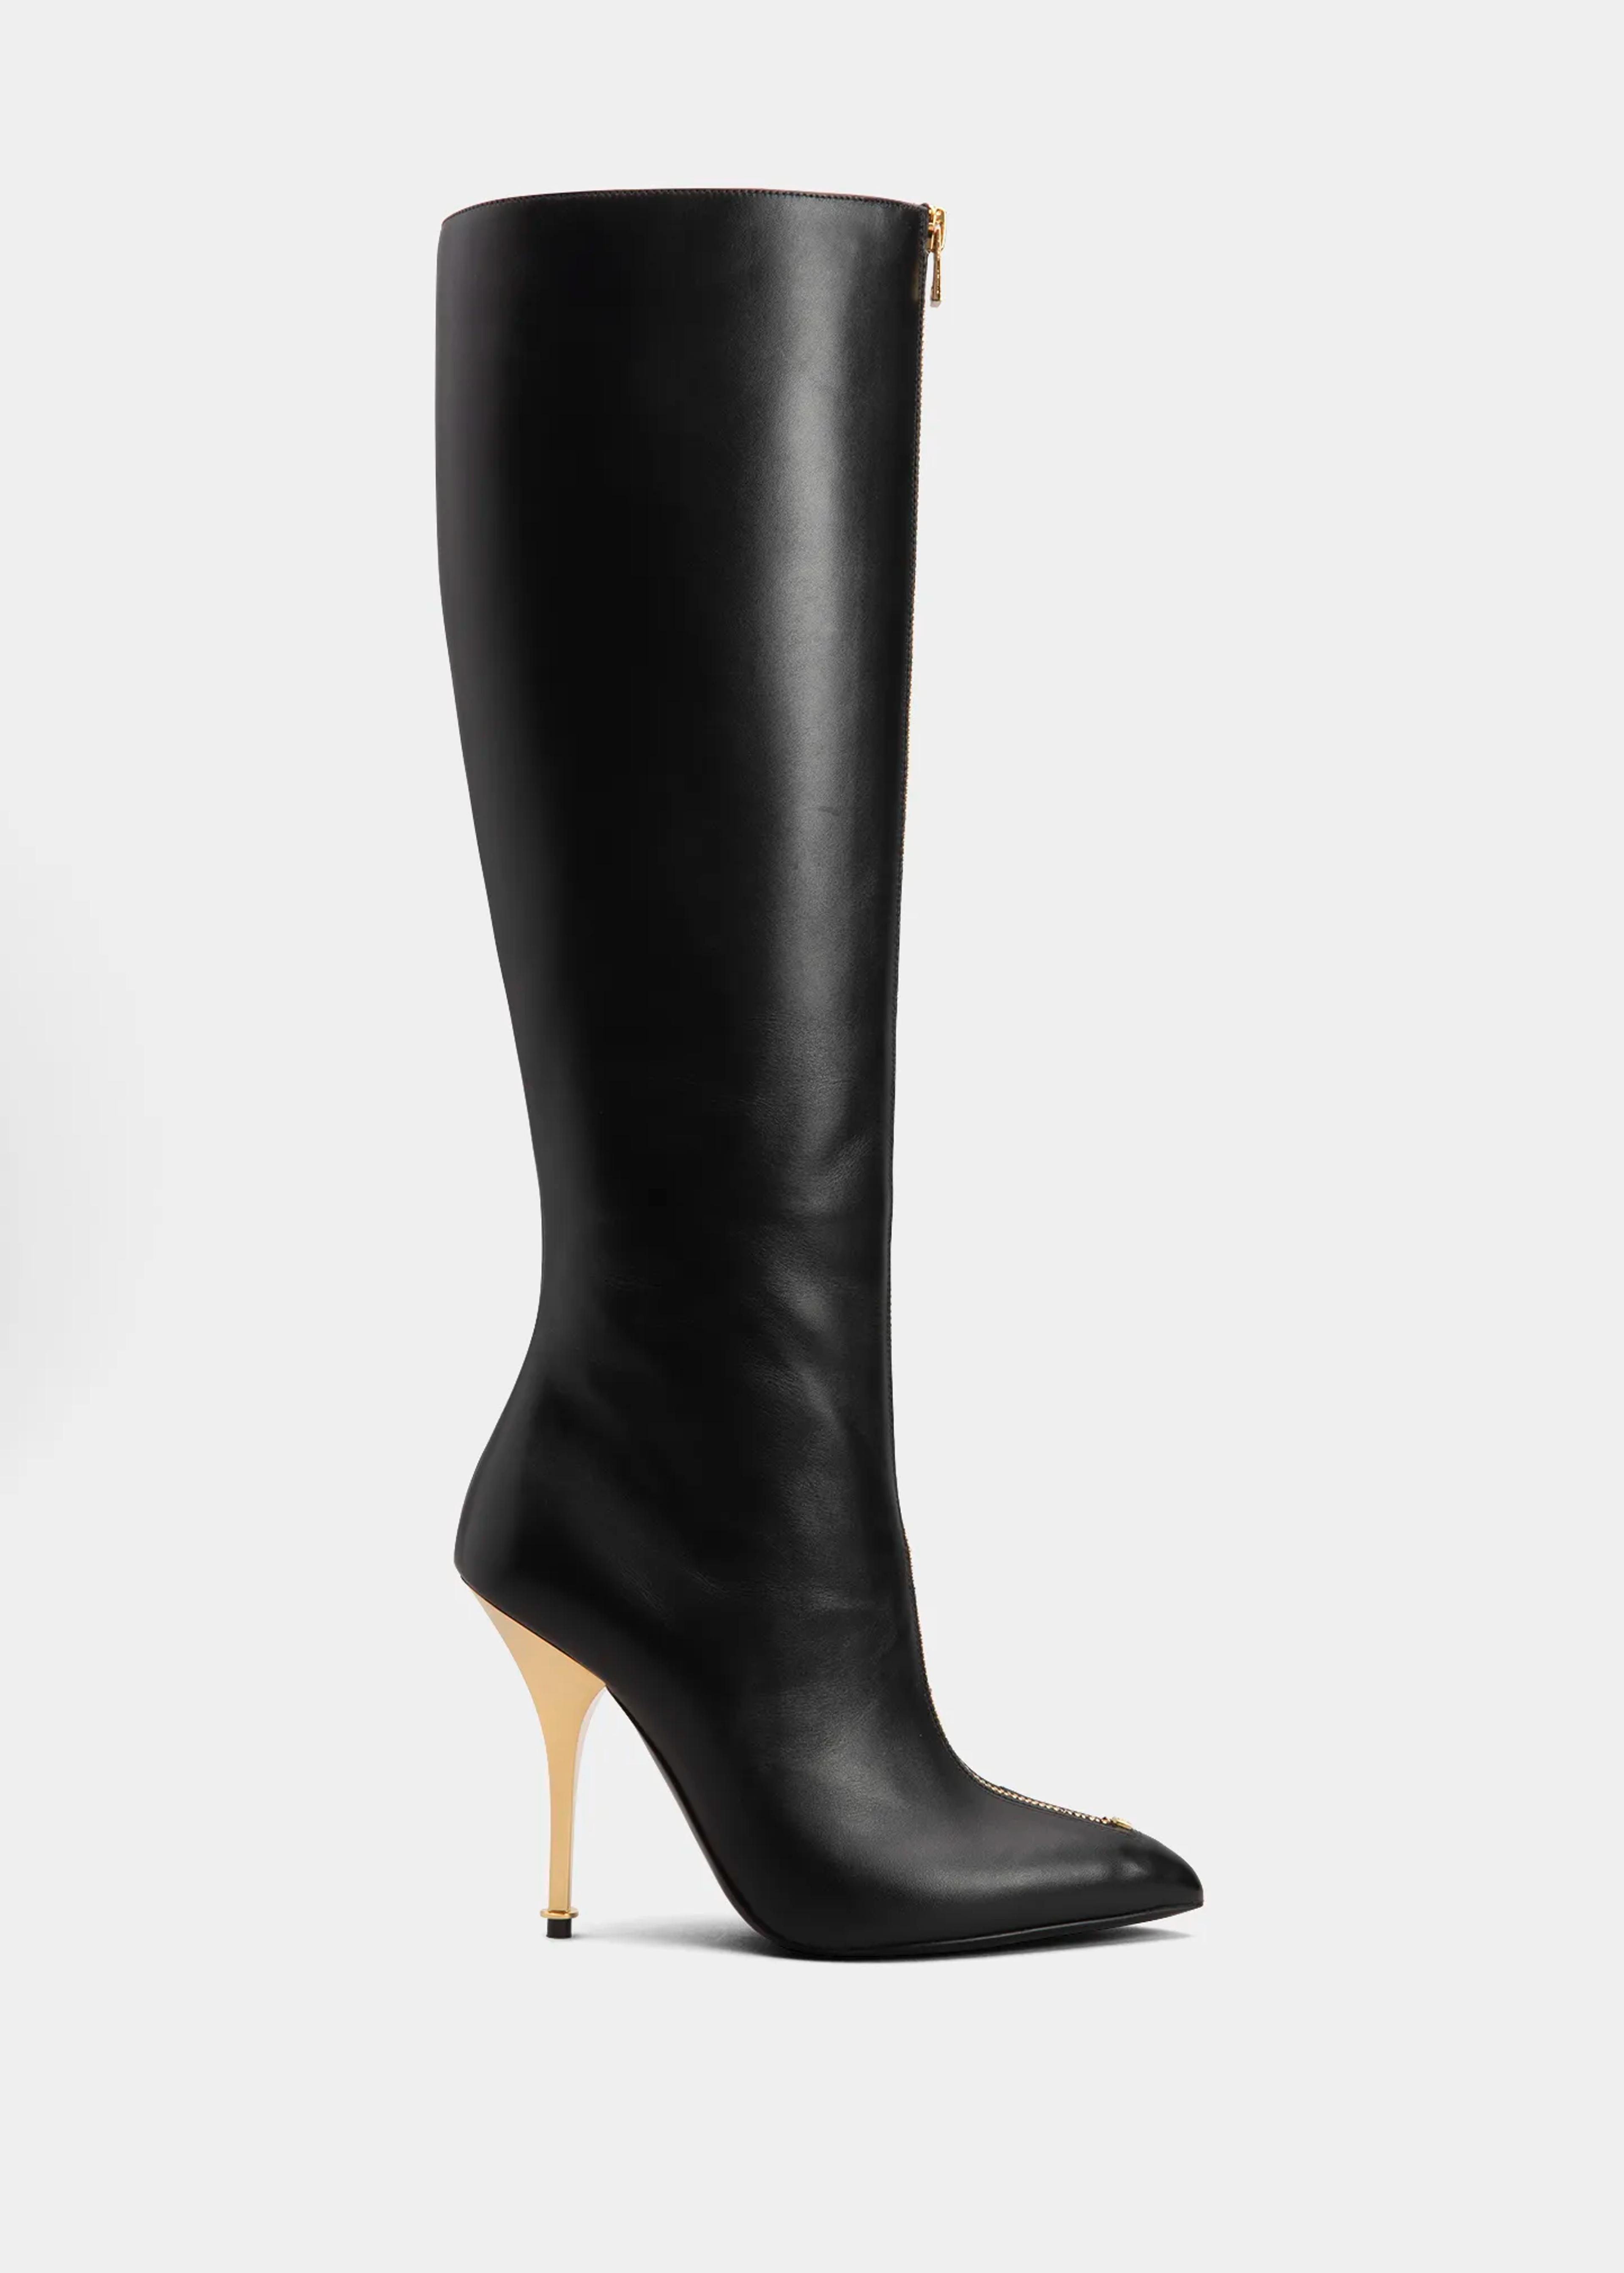 TOM FORD Leather Zip Knee Boots - Bergdorf Goodman